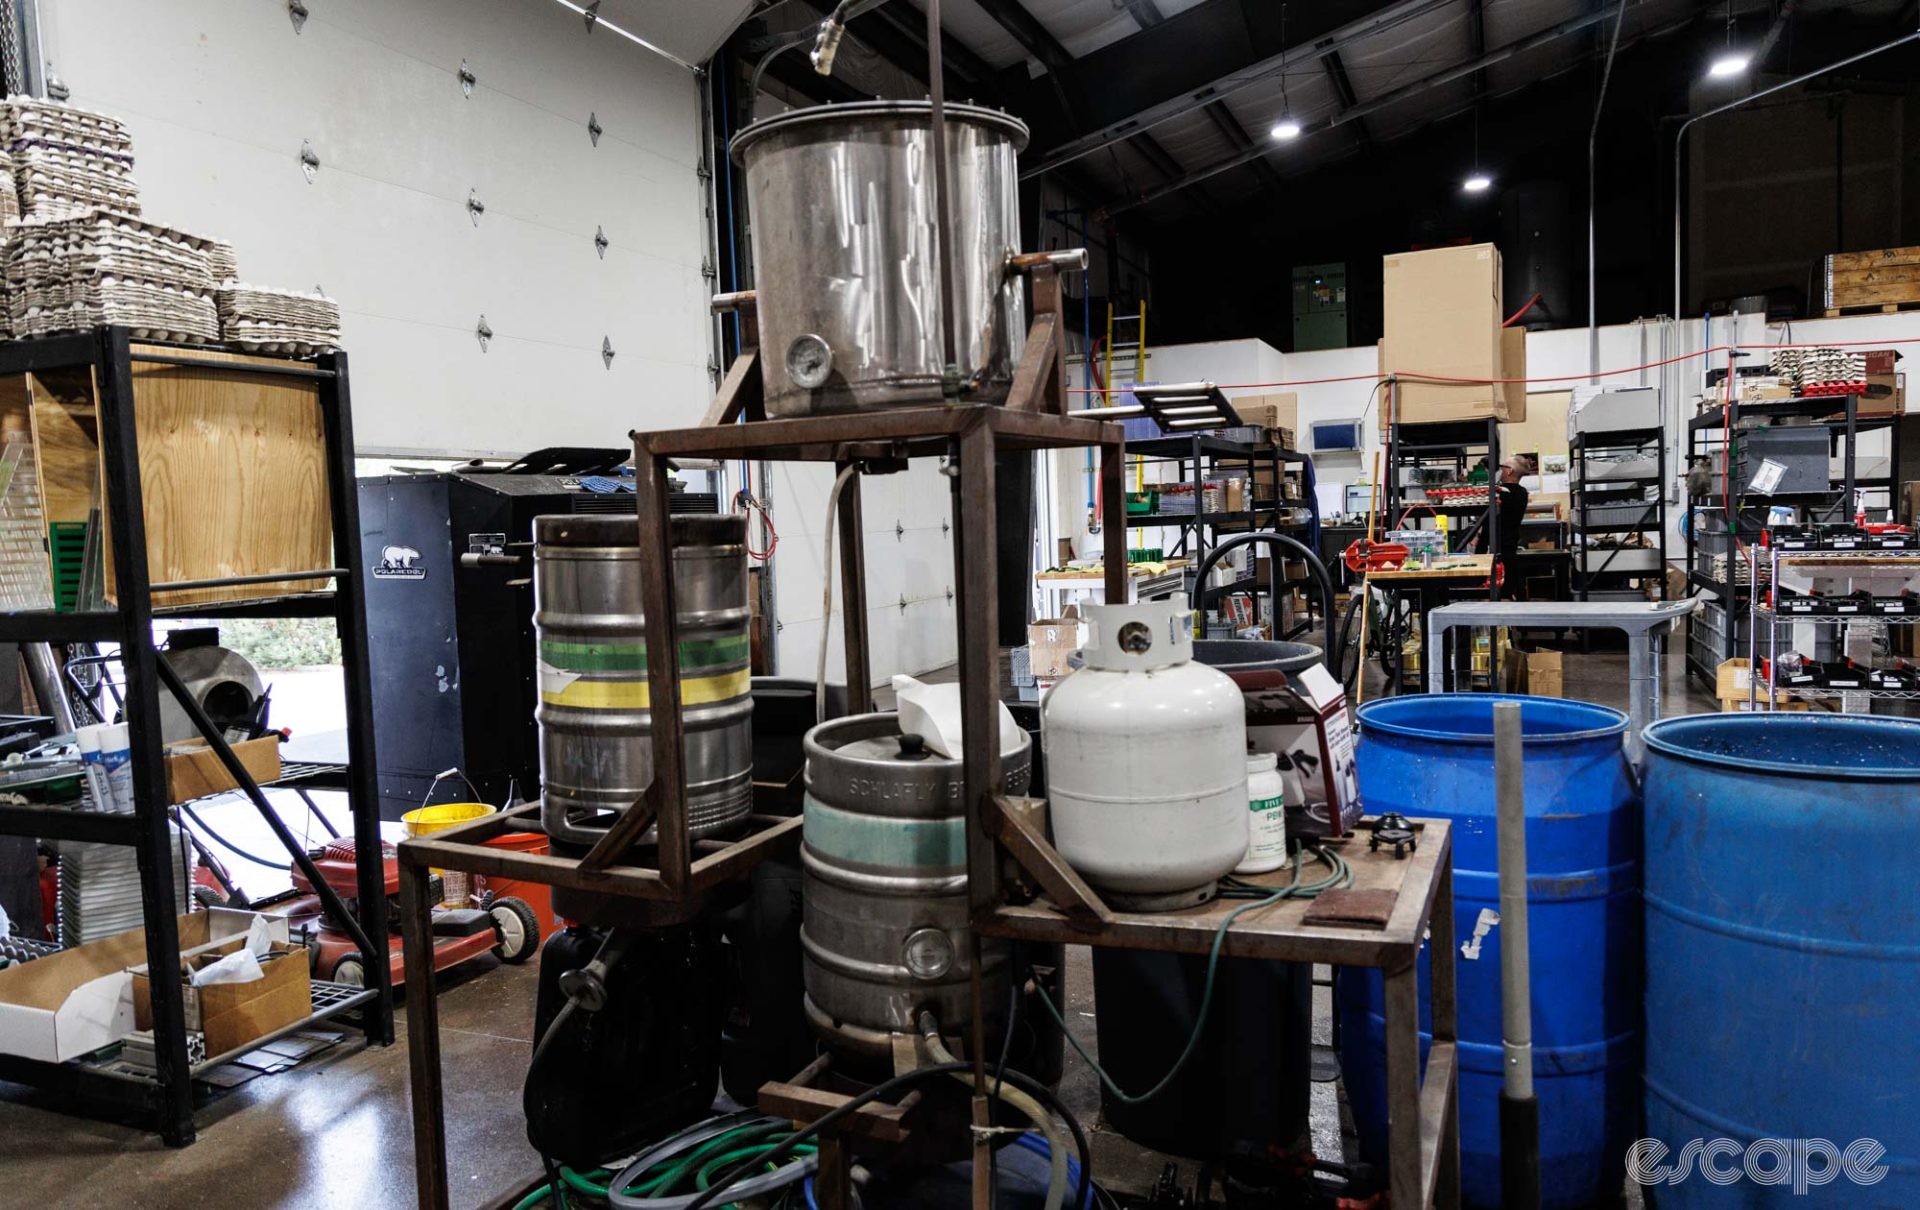 Jason Quade's homebrewing equipment sits on the shop floor. There's a large brewing tun on a high shelf and two kegs below it.